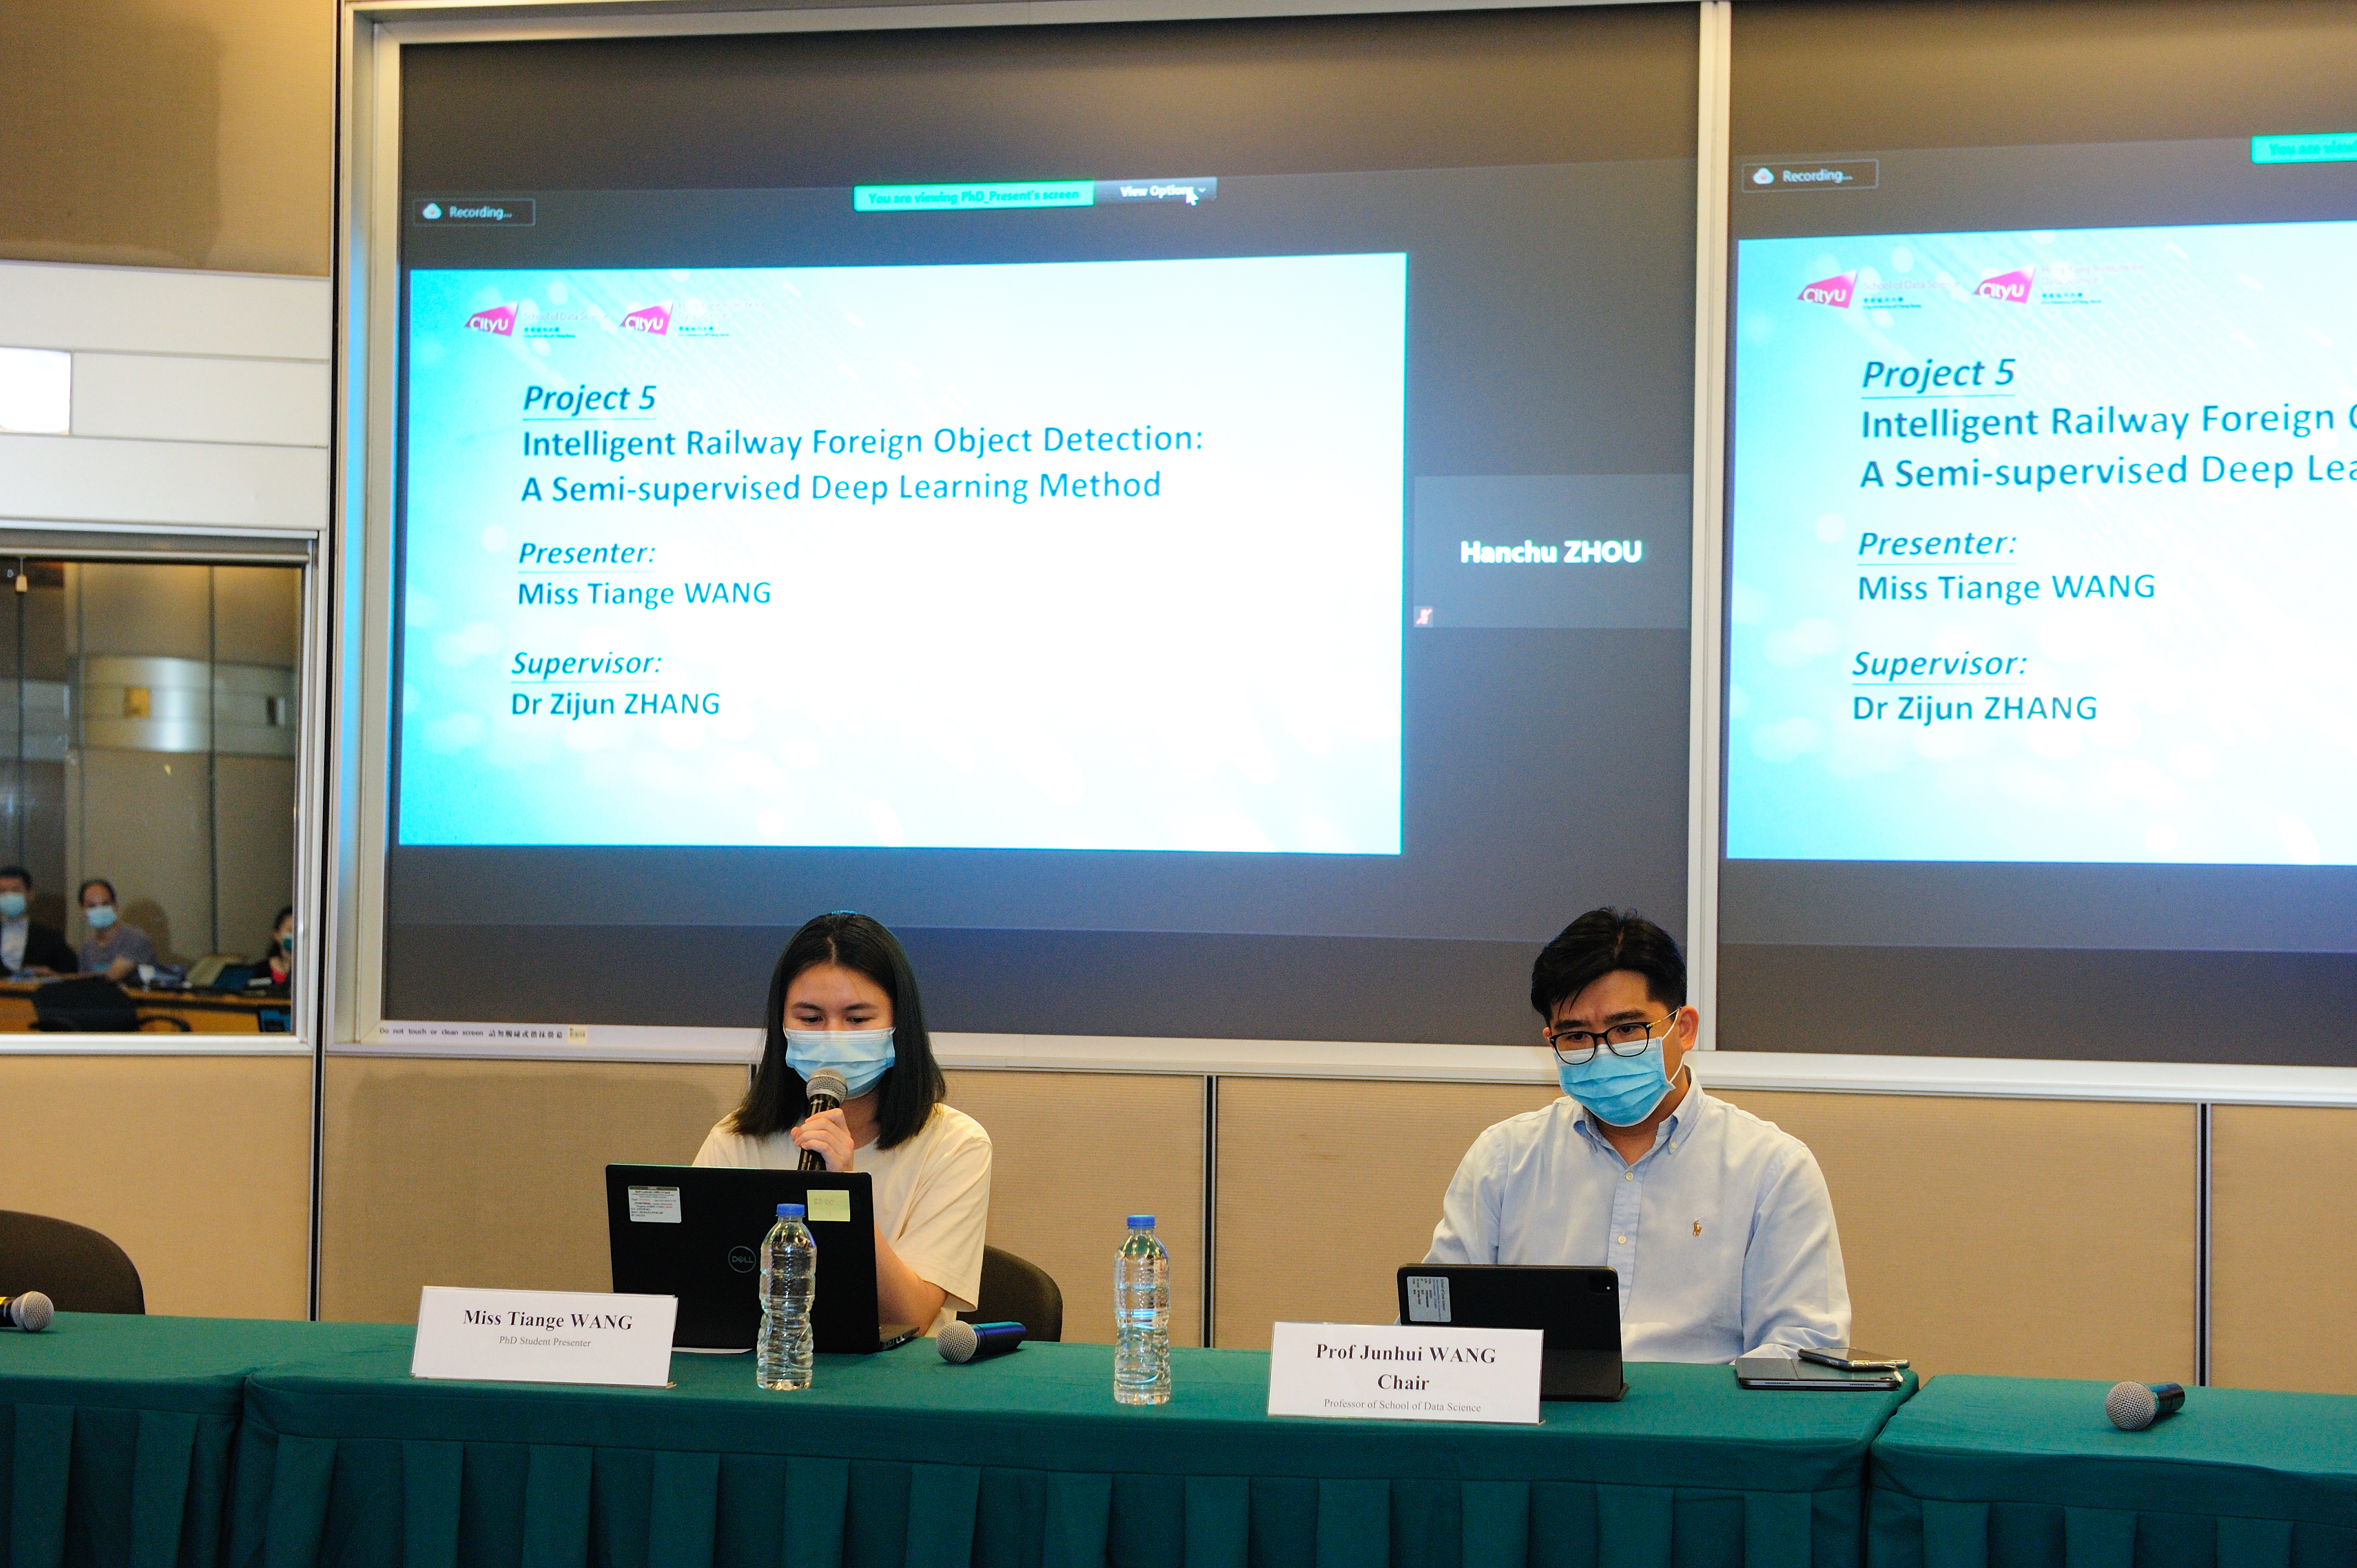 Technical presentations to showcase HKIDS’s cutting-edge research capabilities were chaired by Professor Dingxuan ZHOU and co-chair Professor Minghua CHEN